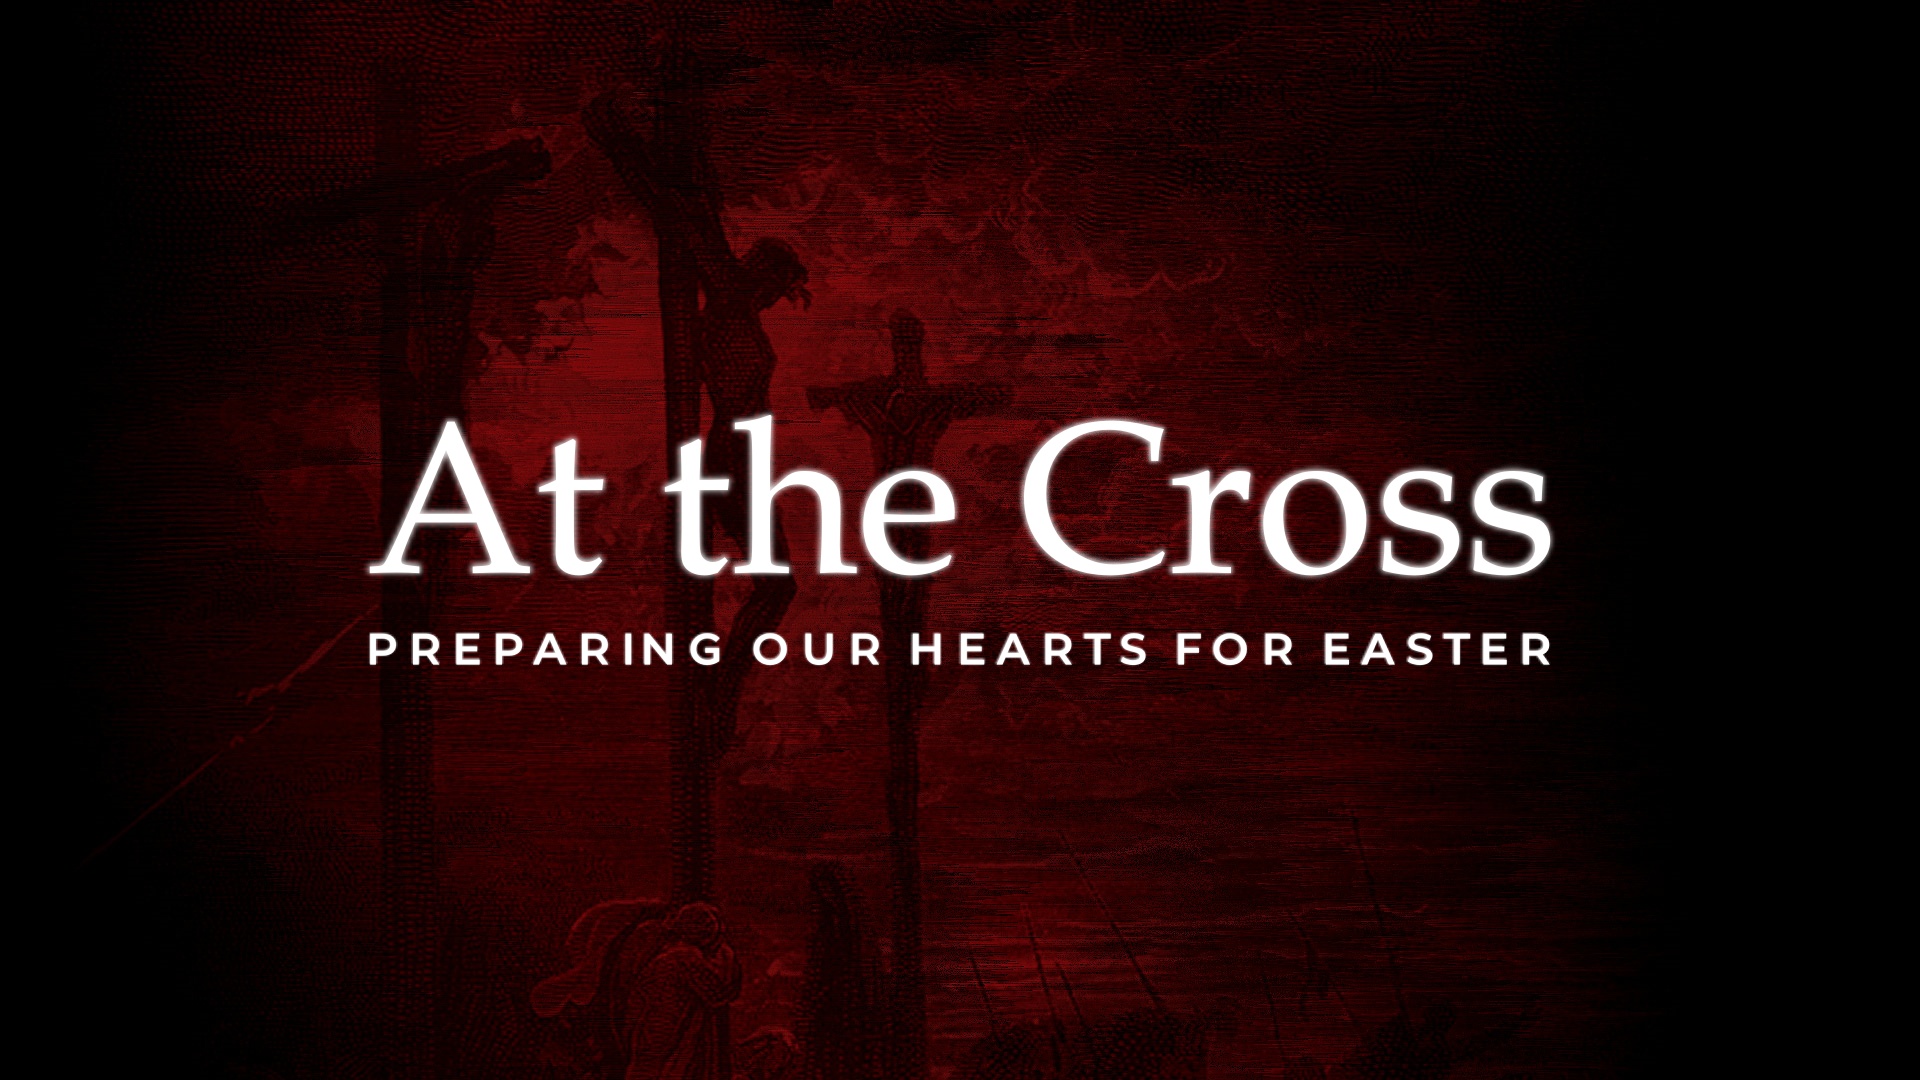 The Cries From the Cross - Part 2